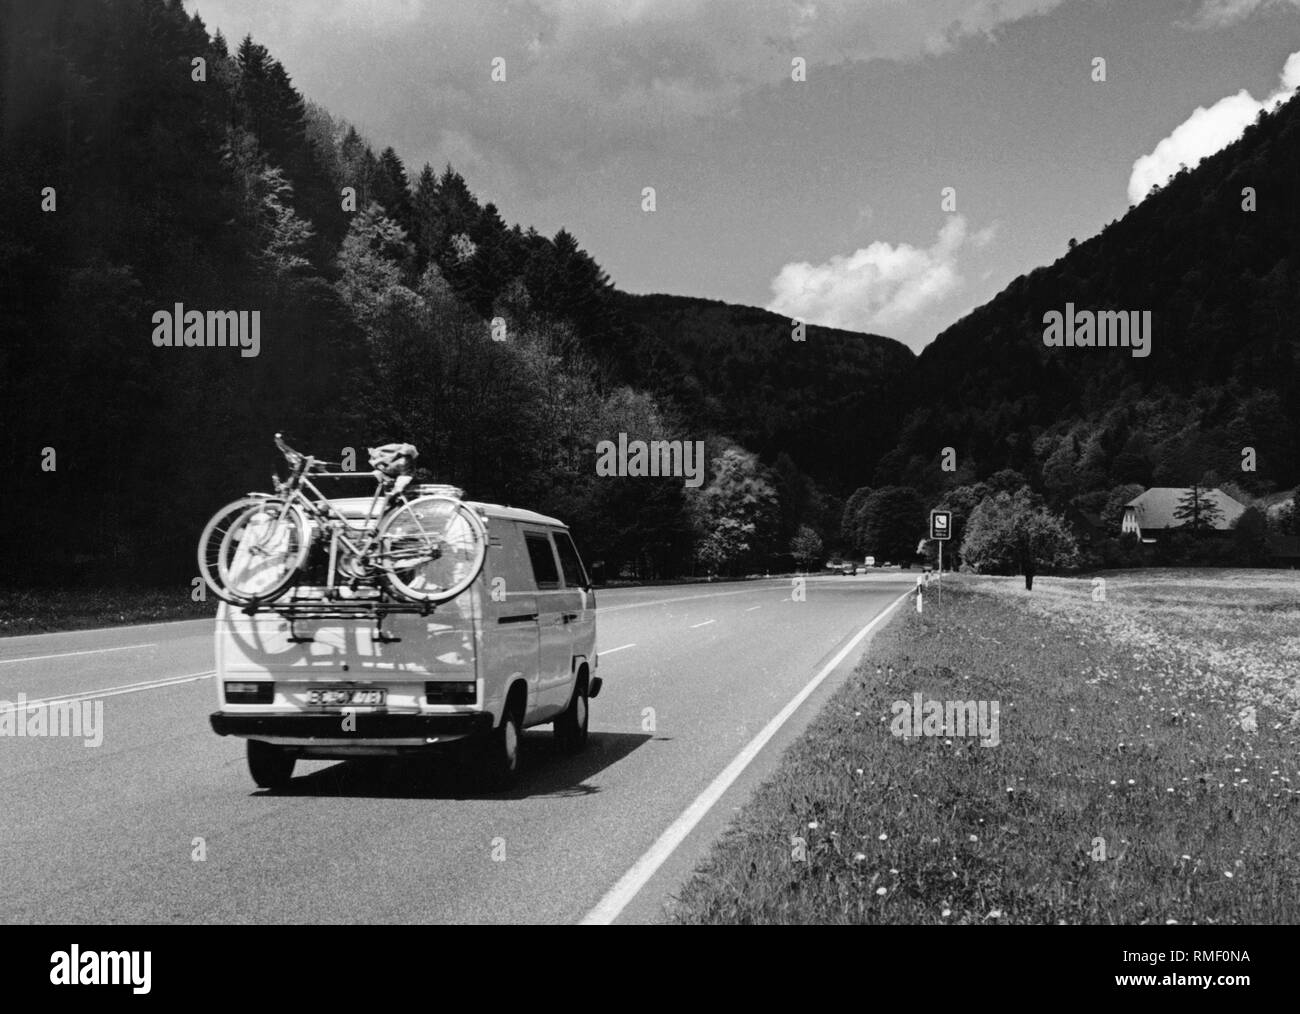 A VW T3 bus with bike rack on a country road. Stock Photo